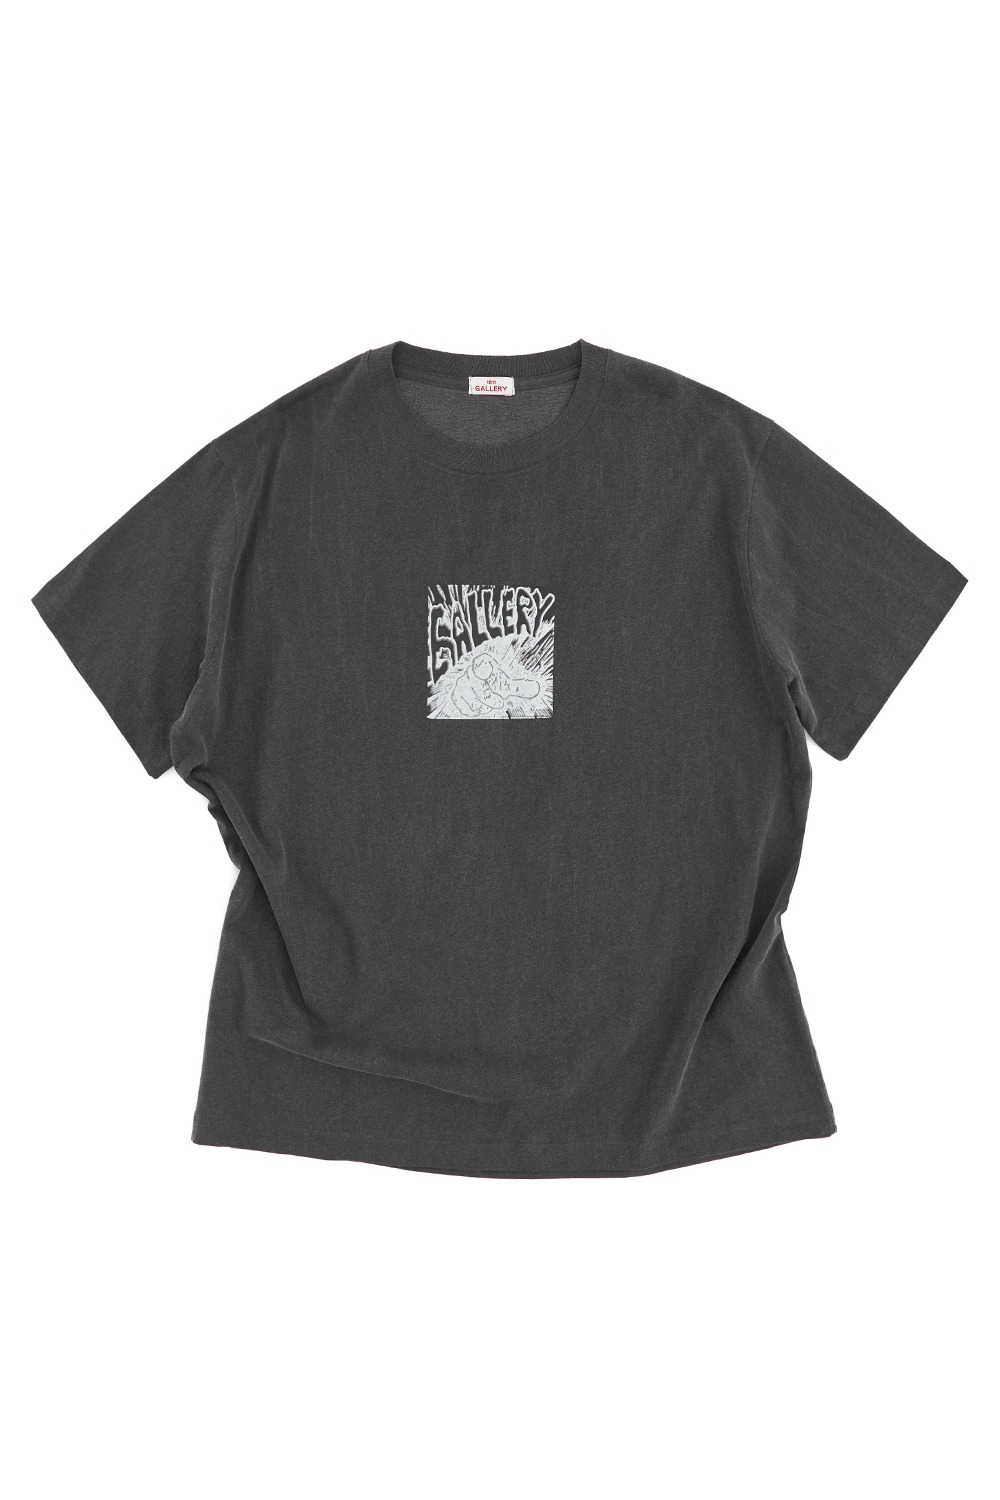 You Have To Choose 1011 Gallery T-Shirt-Charcoal Grey